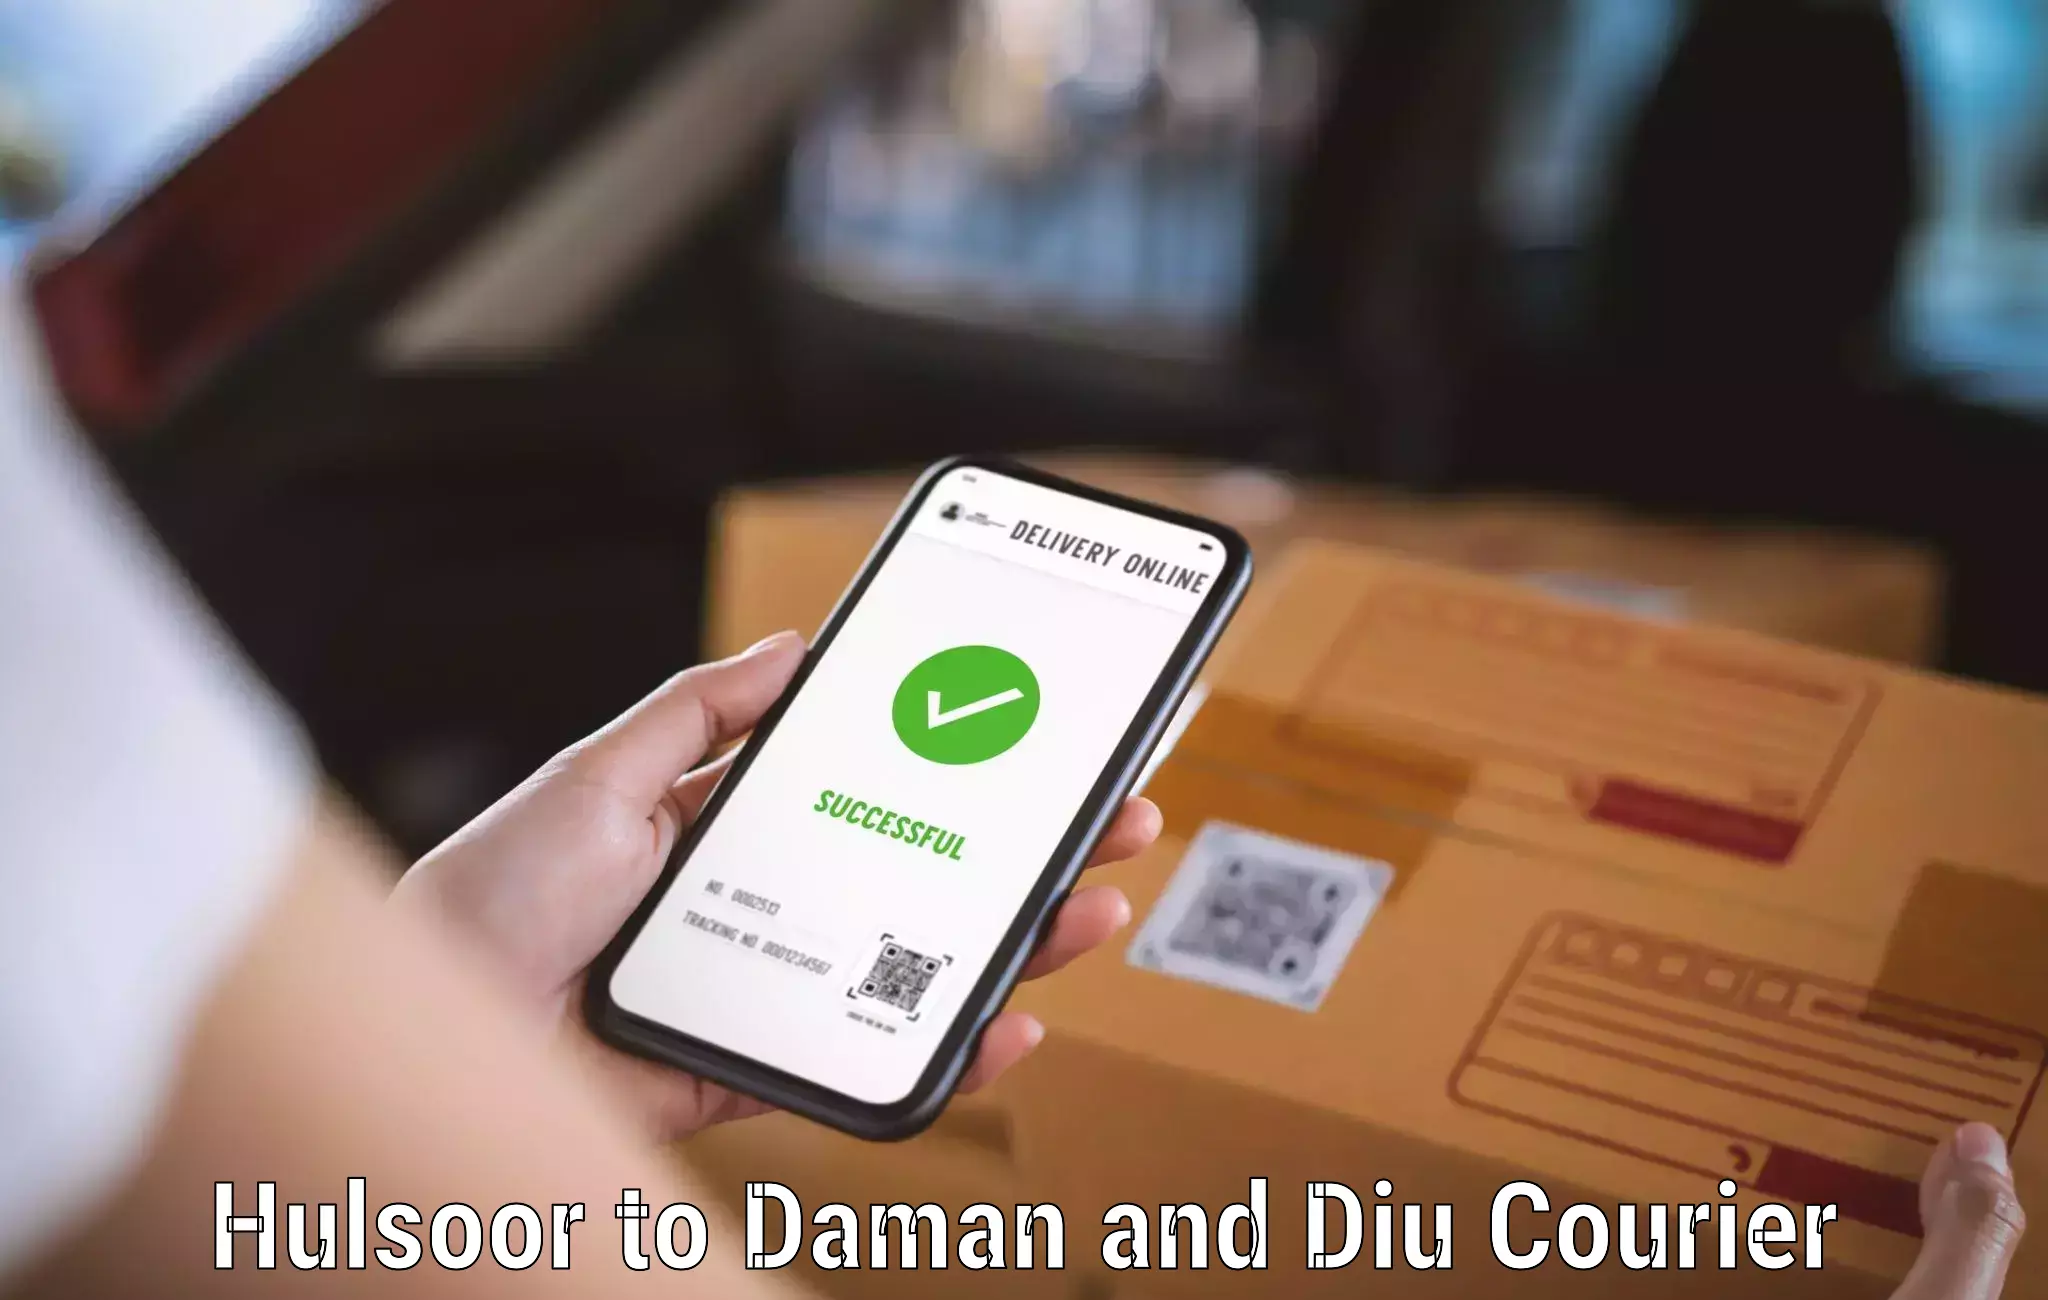 24/7 courier service Hulsoor to Daman and Diu